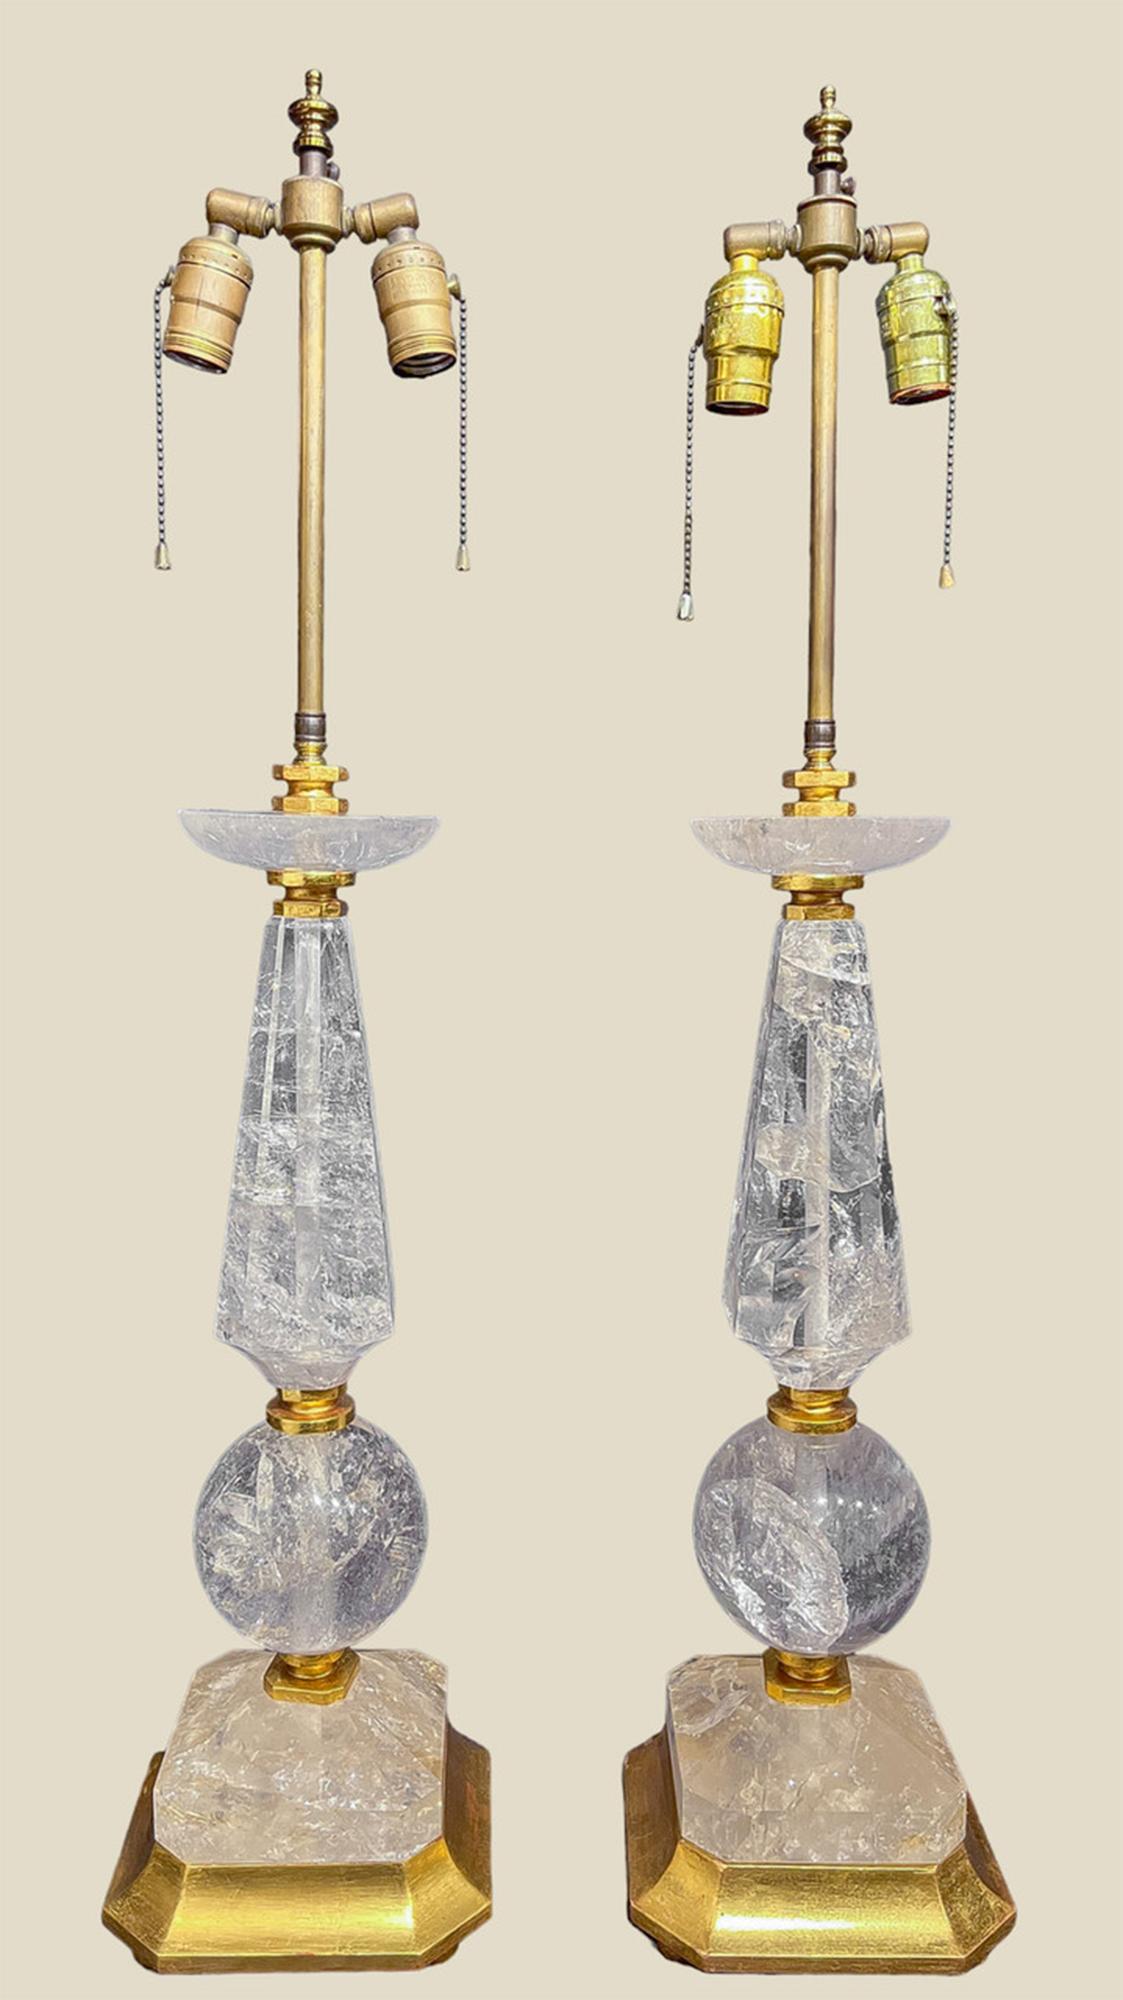 A fine pair of Hollywood Regency or Art Deco style geometric rock crystal lamps with rock crystal cut into spheres, obelisk-esque necks and disks. The large facets within the rock flash rainbows when light is cast through them, creating beautiful